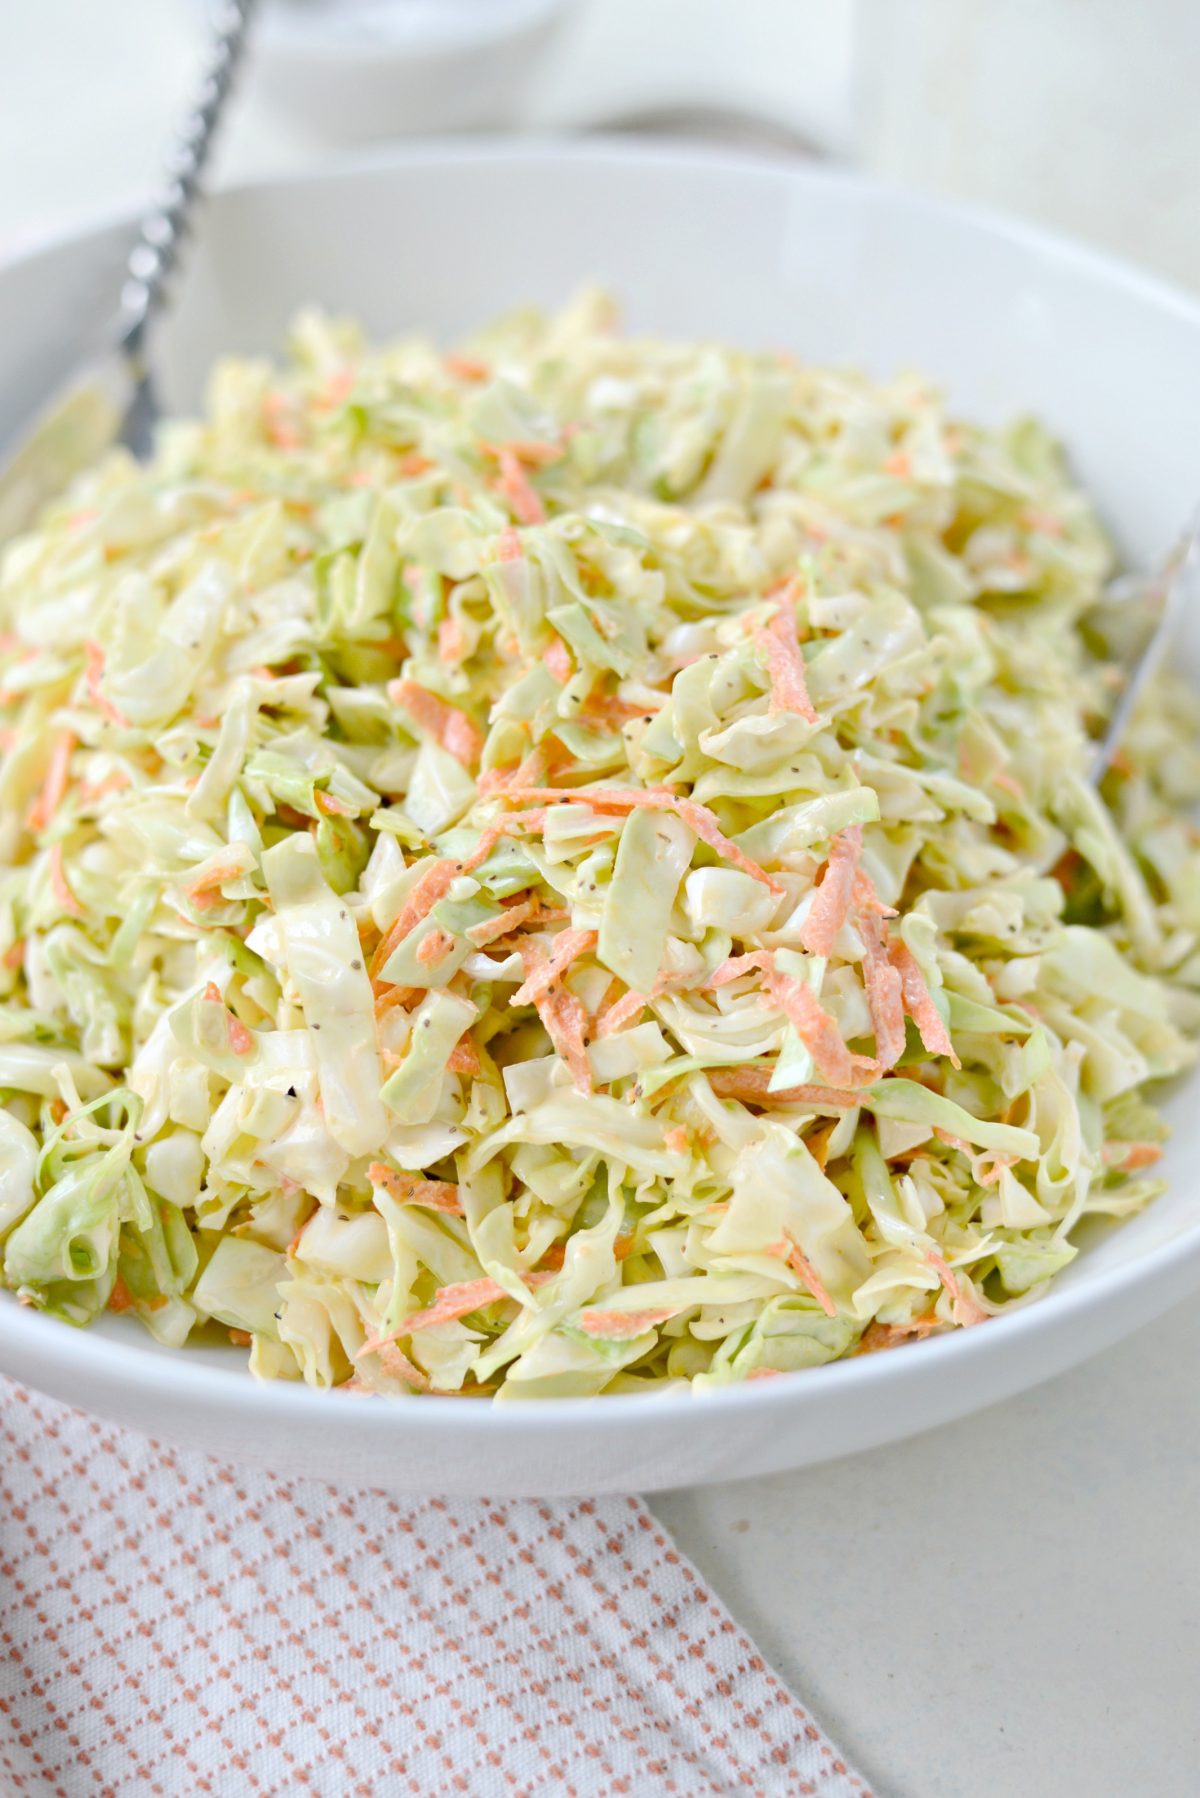 Classic Coleslaw Recipe with Homemade Dressing